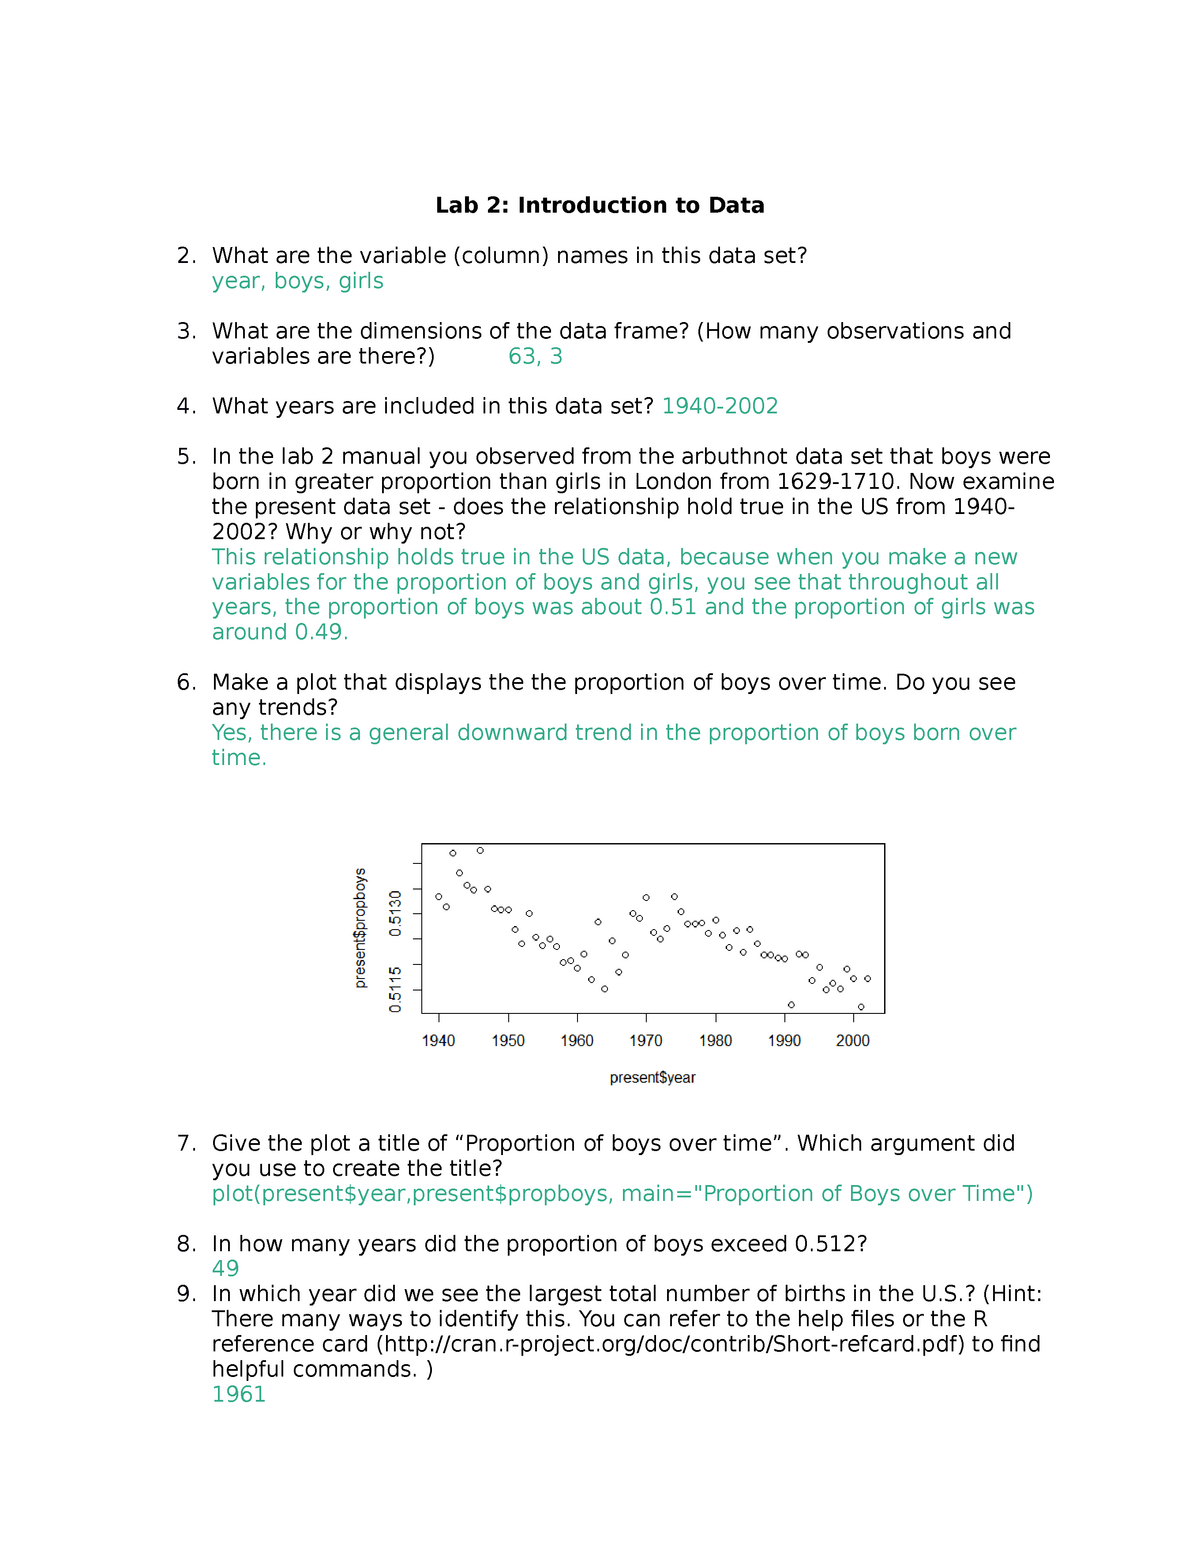 Lab 2 (1-22) - qtm lab assignment - Lab 2: Introduction to Data